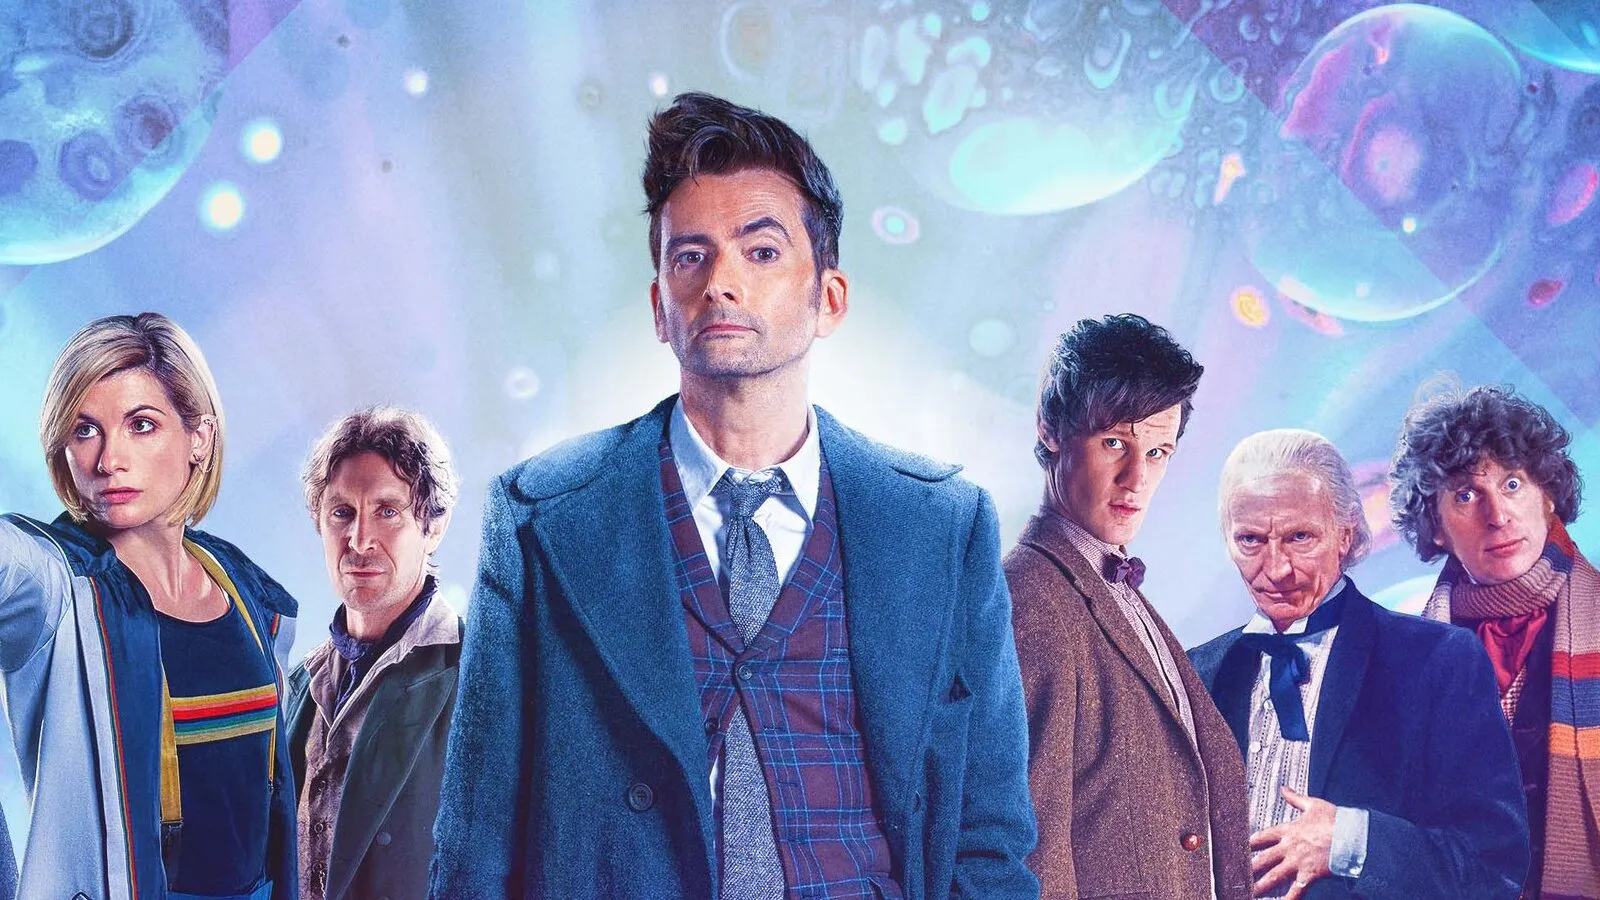 David Tennant and other Doctors in special Doctor Who anniversary celebration image